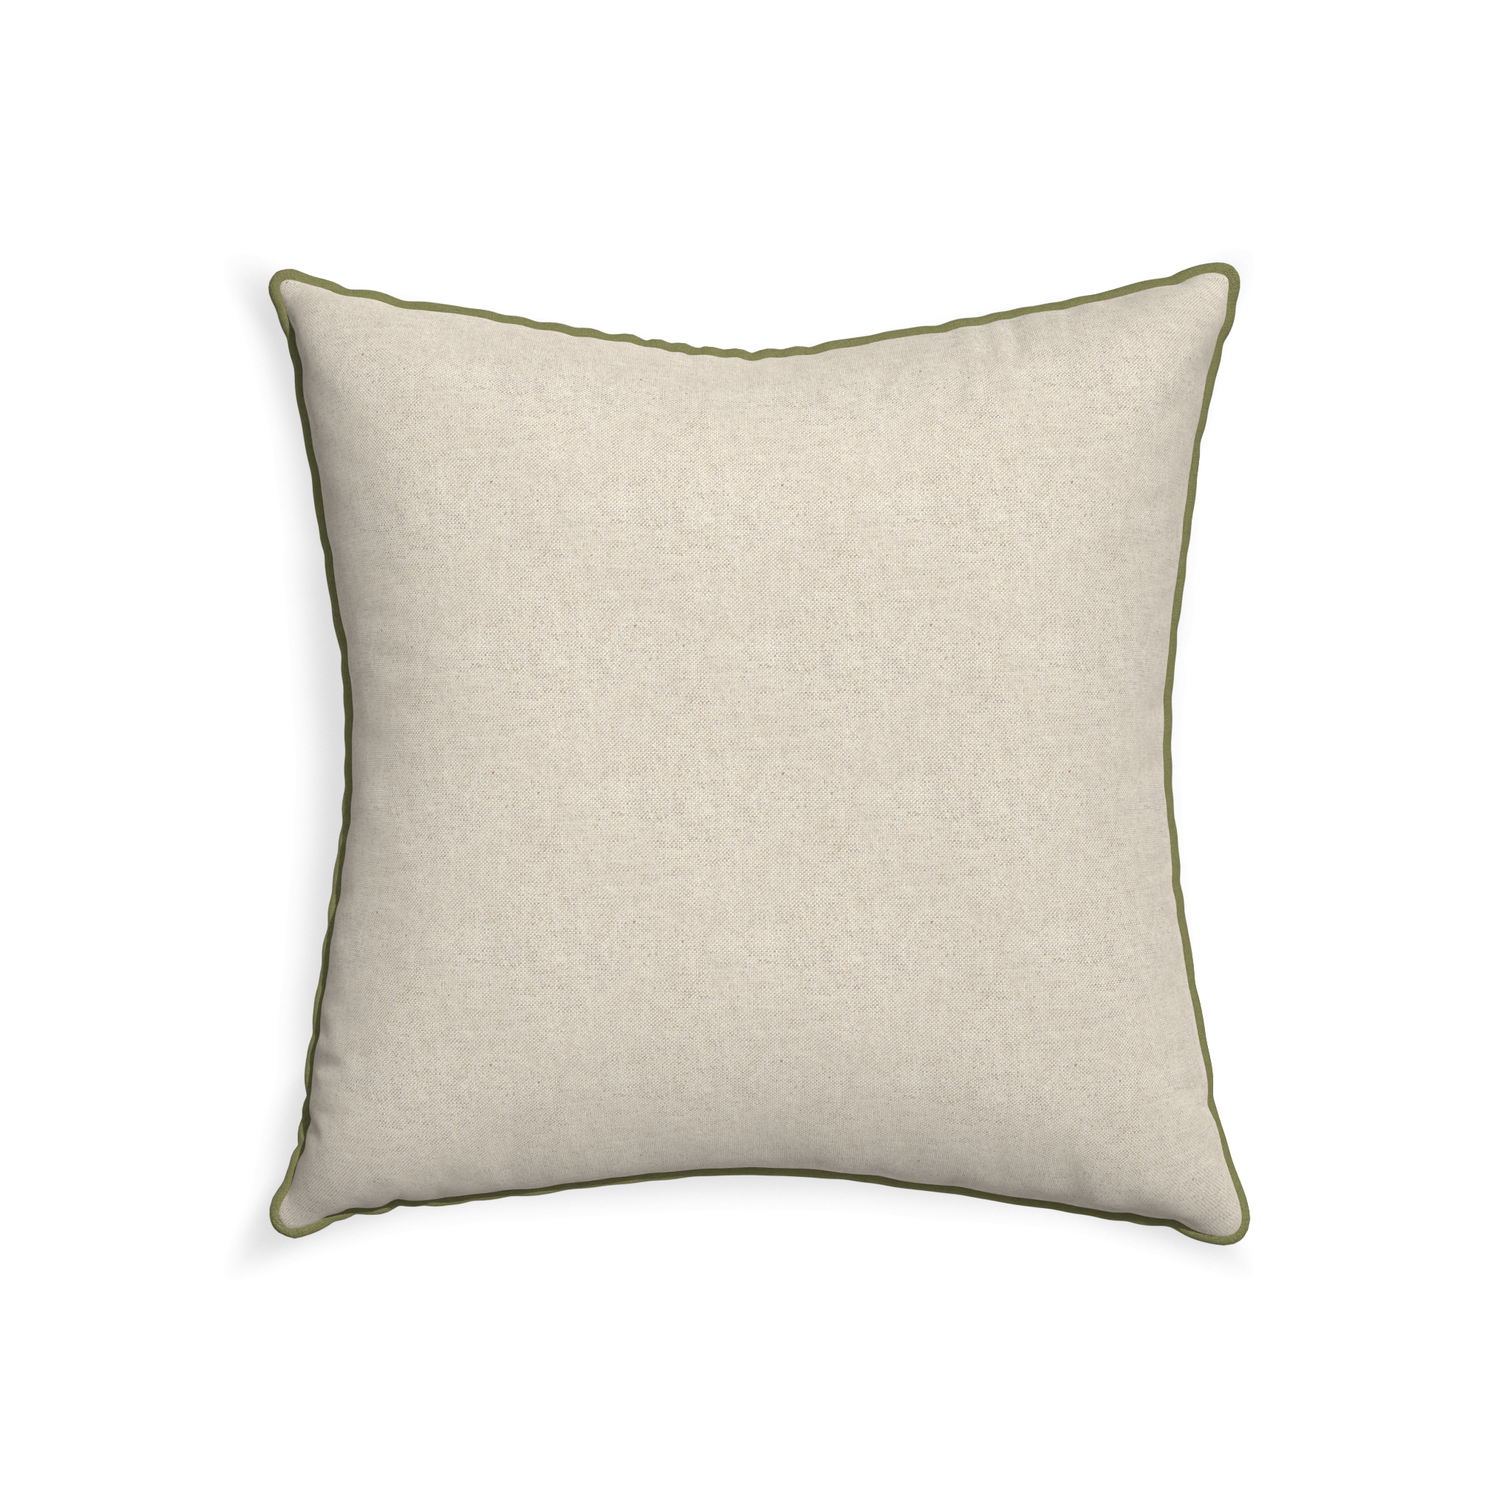 square light brown pillow with moss green piping